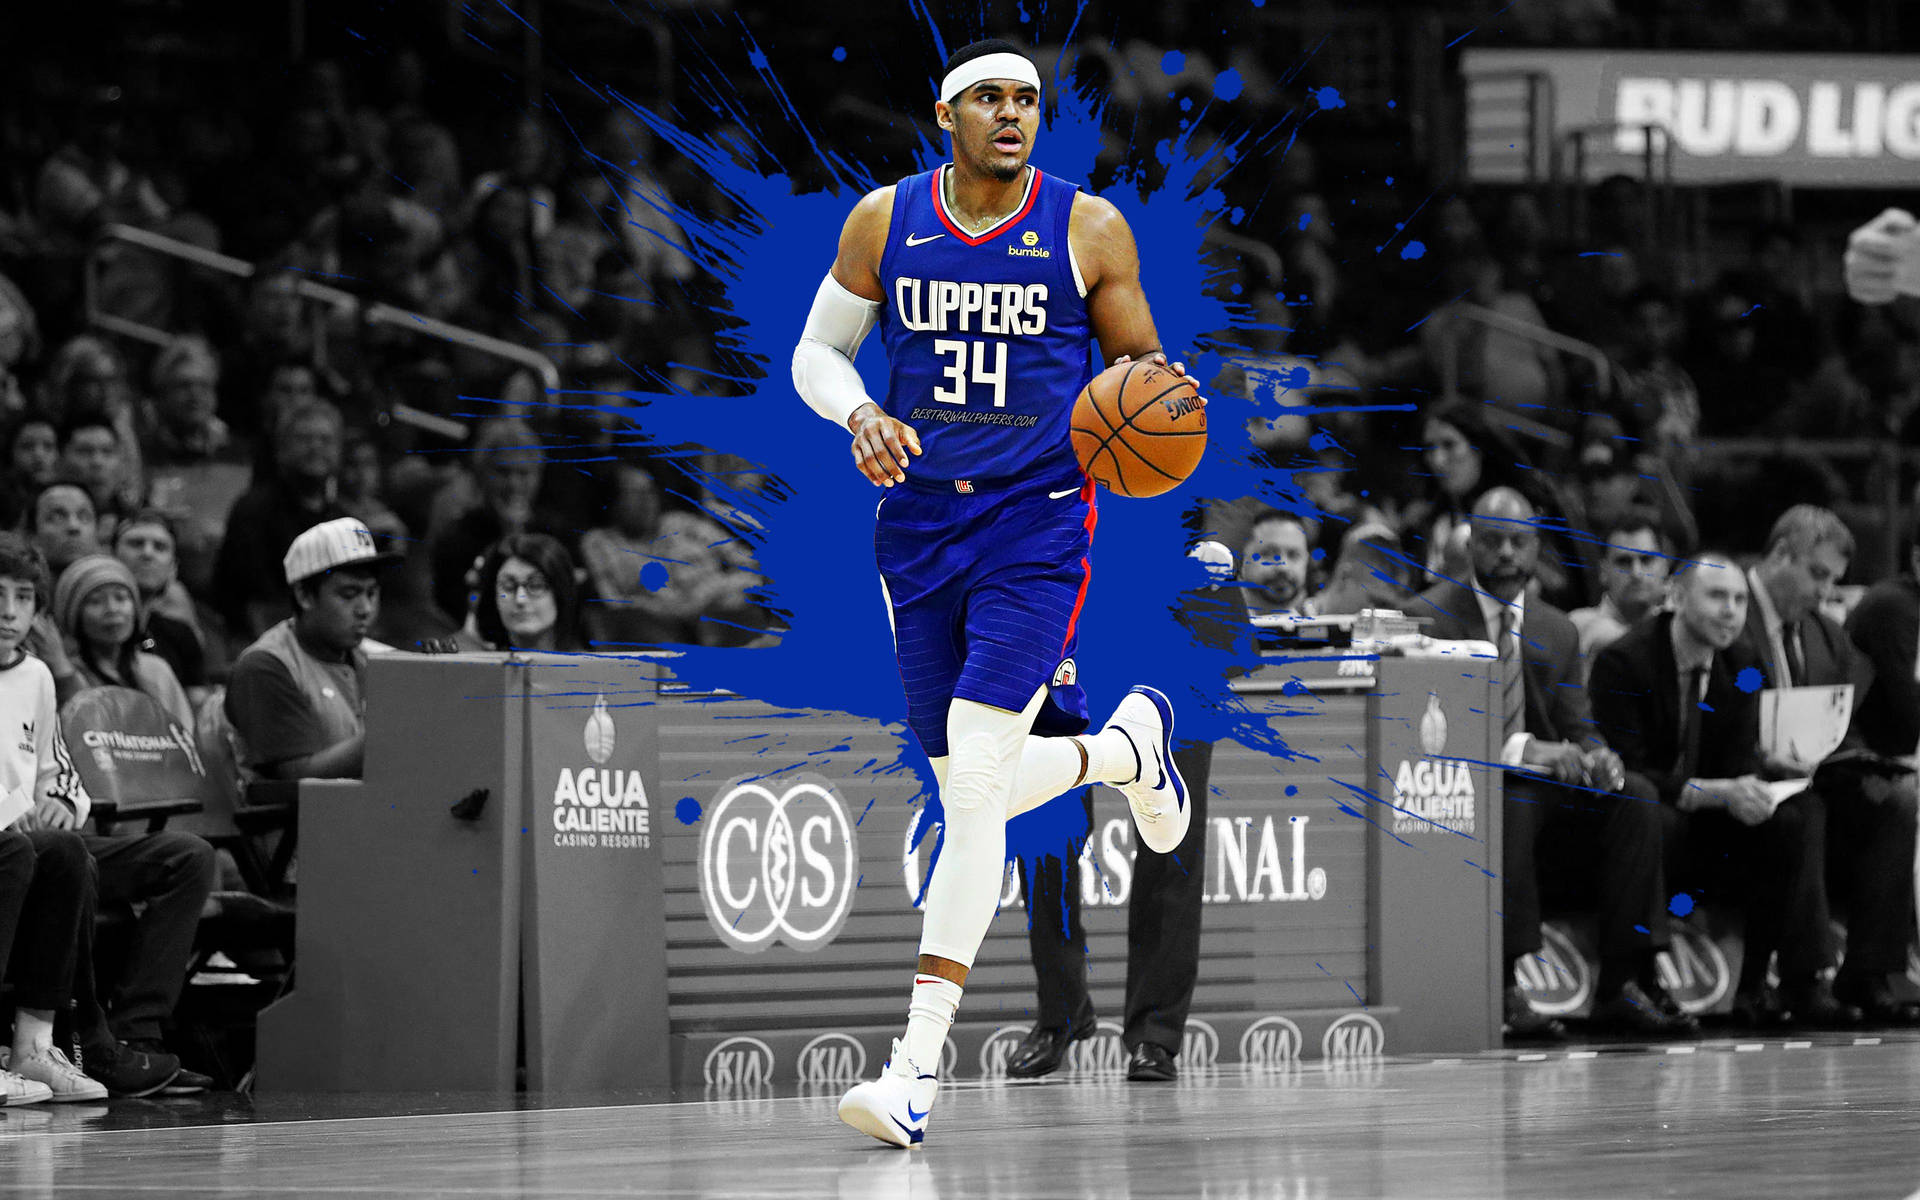 NBA Player Clippers Tobias Harris In The Court Wallpaper